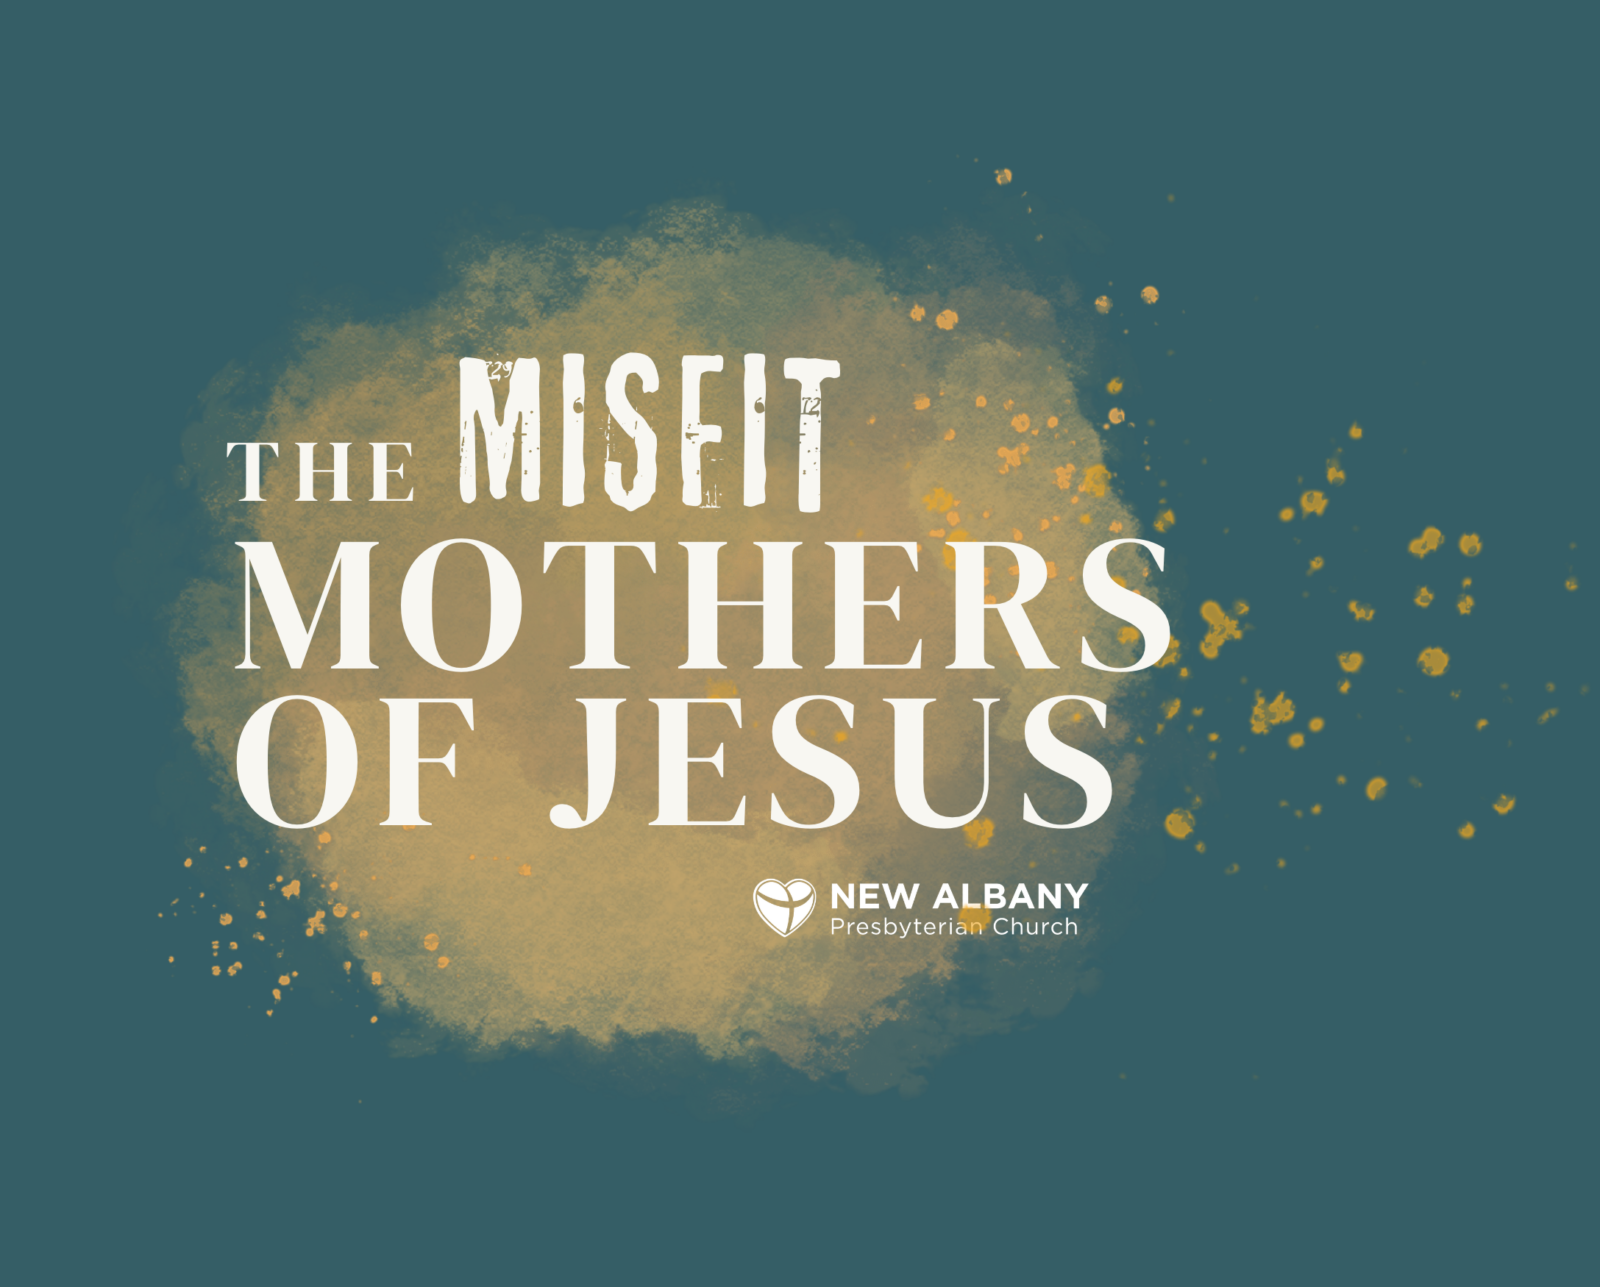 The Misfit Mothers of Jesus